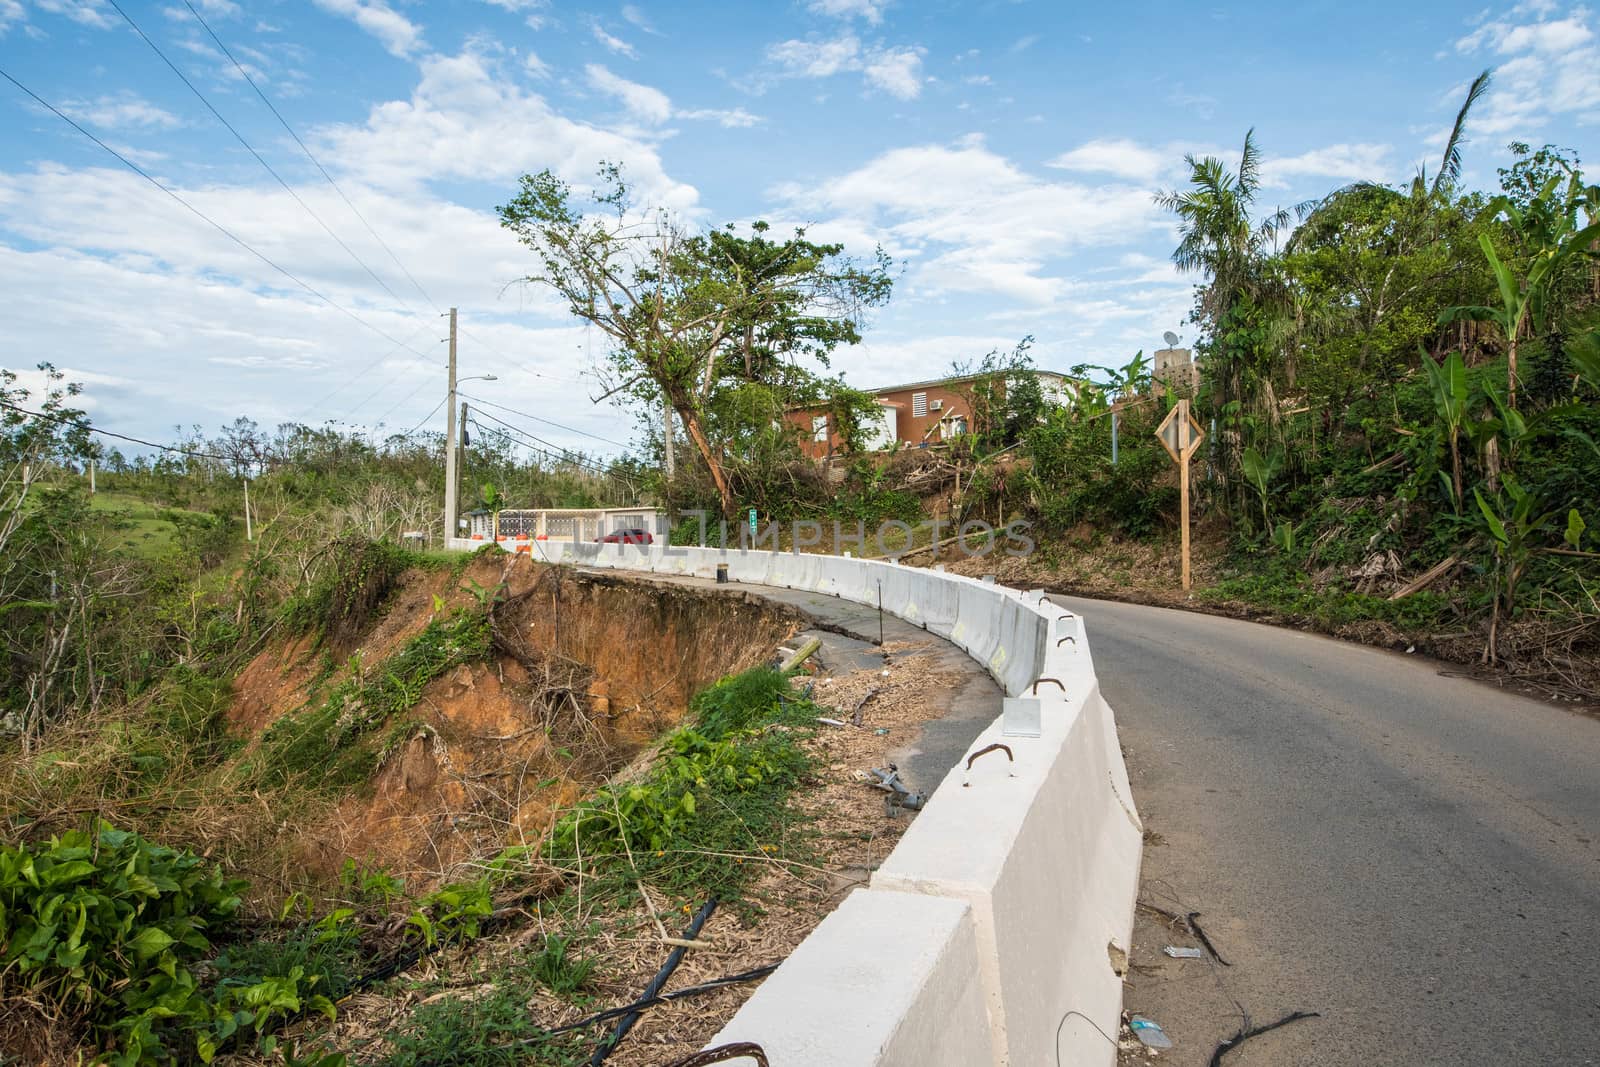 Roadside scene in Puerto Rico after Hurricane Marie showing damage to landscape